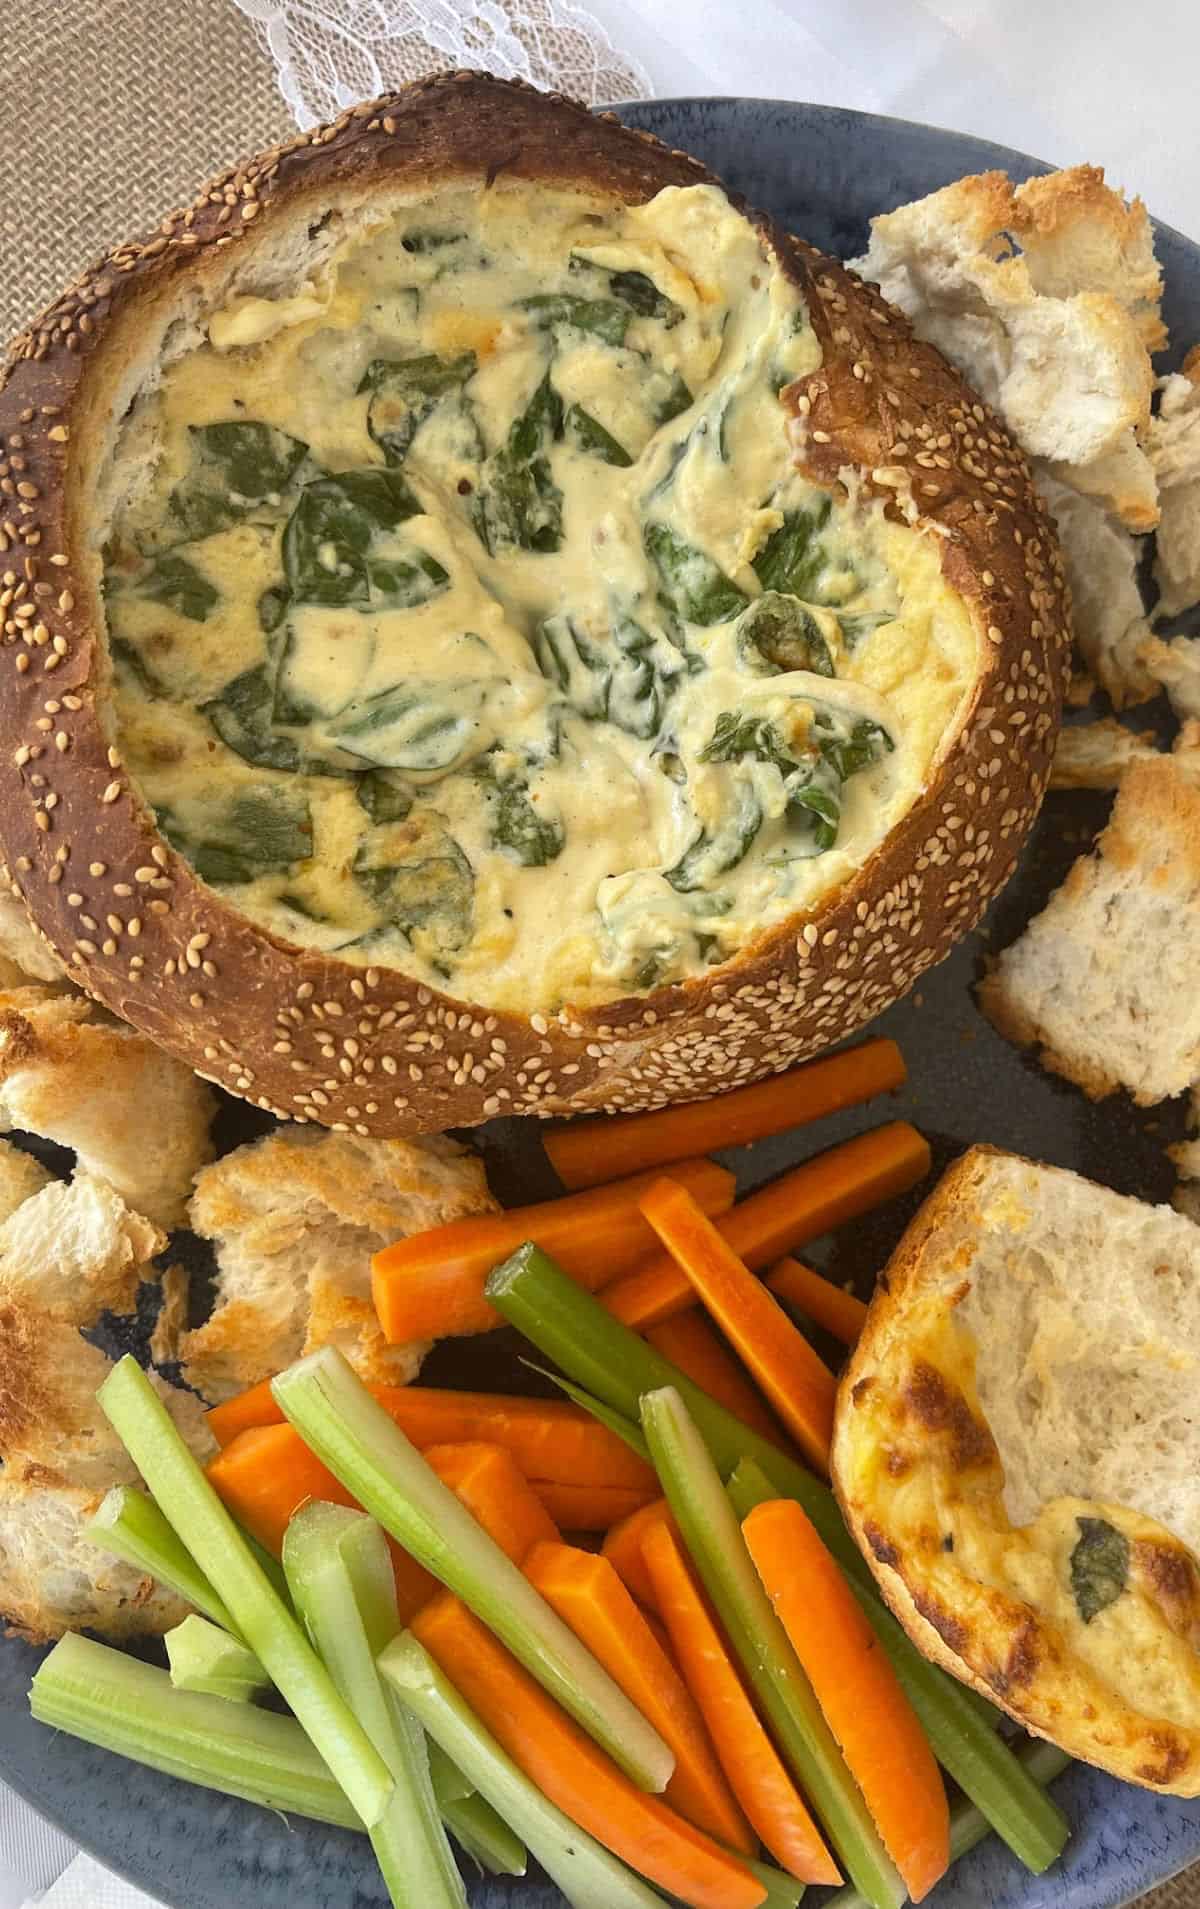 Overhead view of spinach cob loaf on a blue serving tray surrounded by veggie sticks and bread pieces.